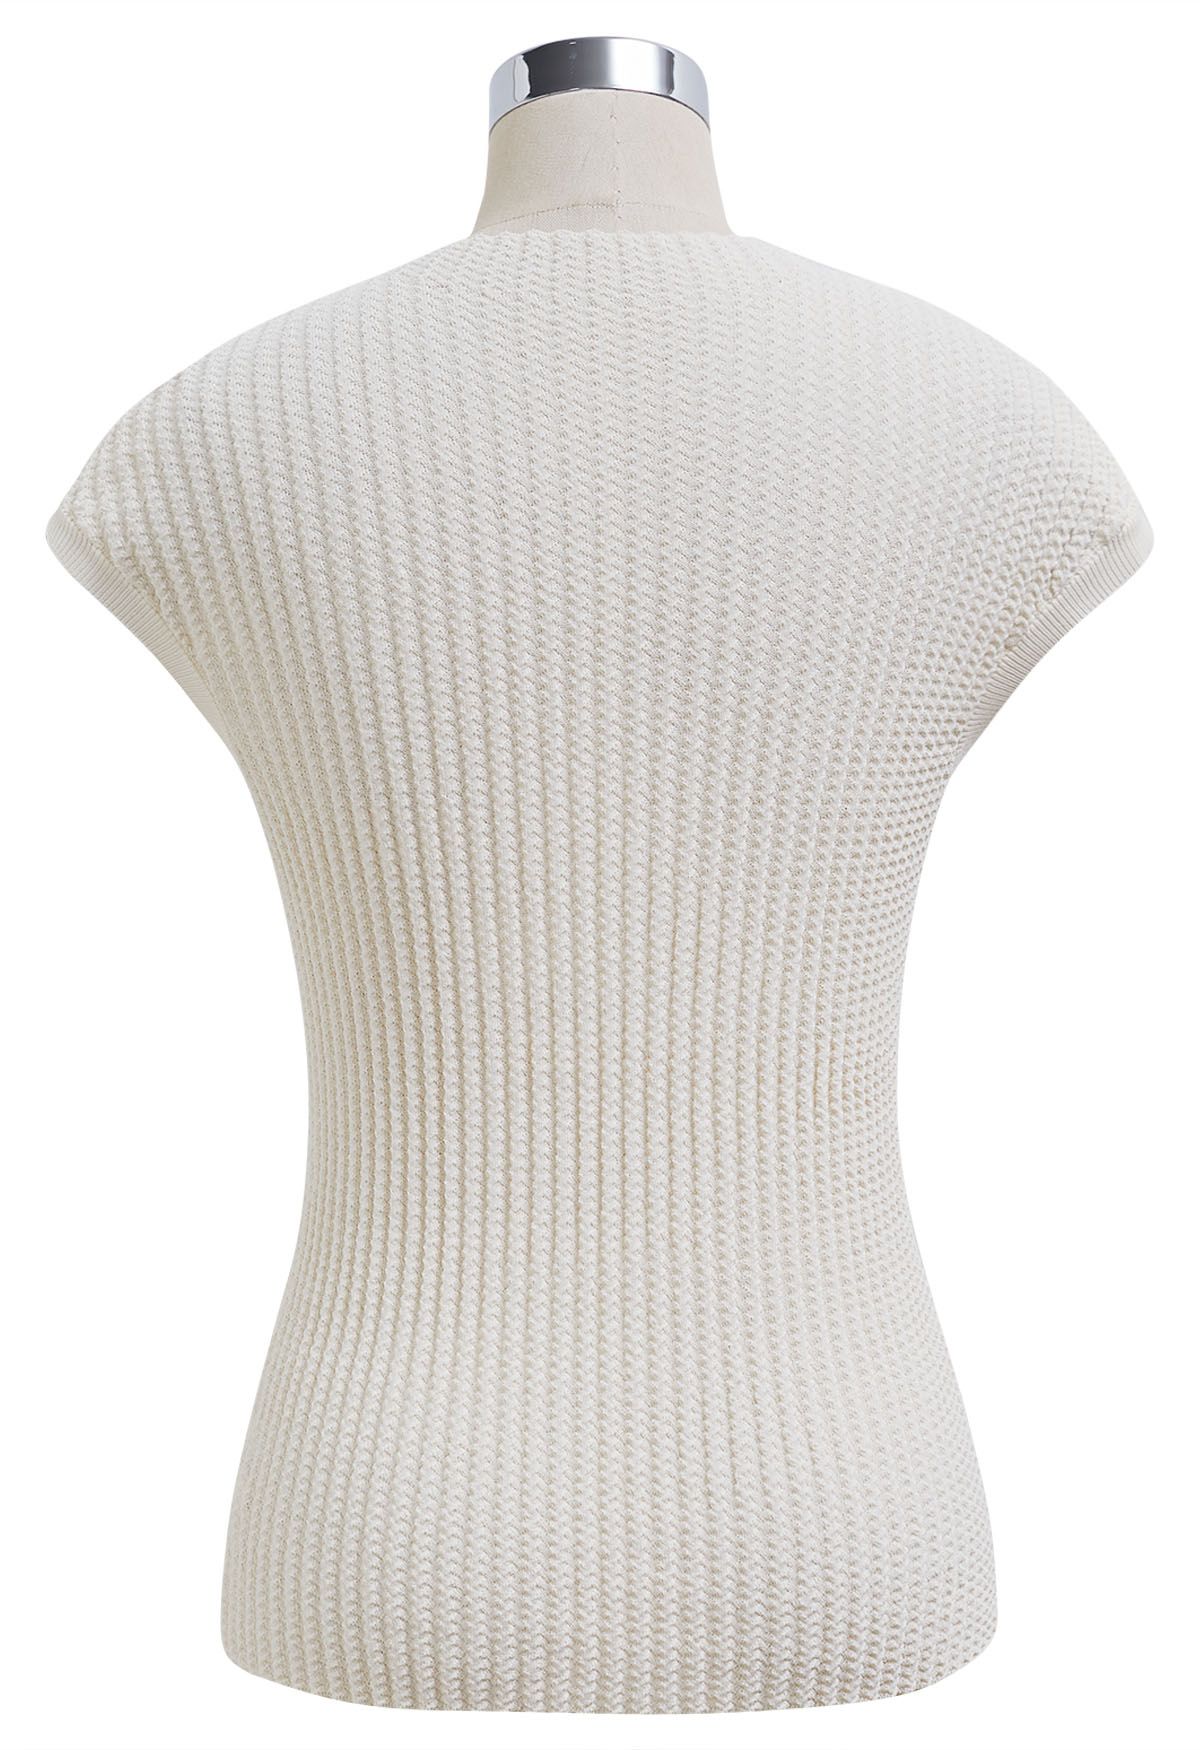 Ribbed Texture Cap Sleeves Top in Cream